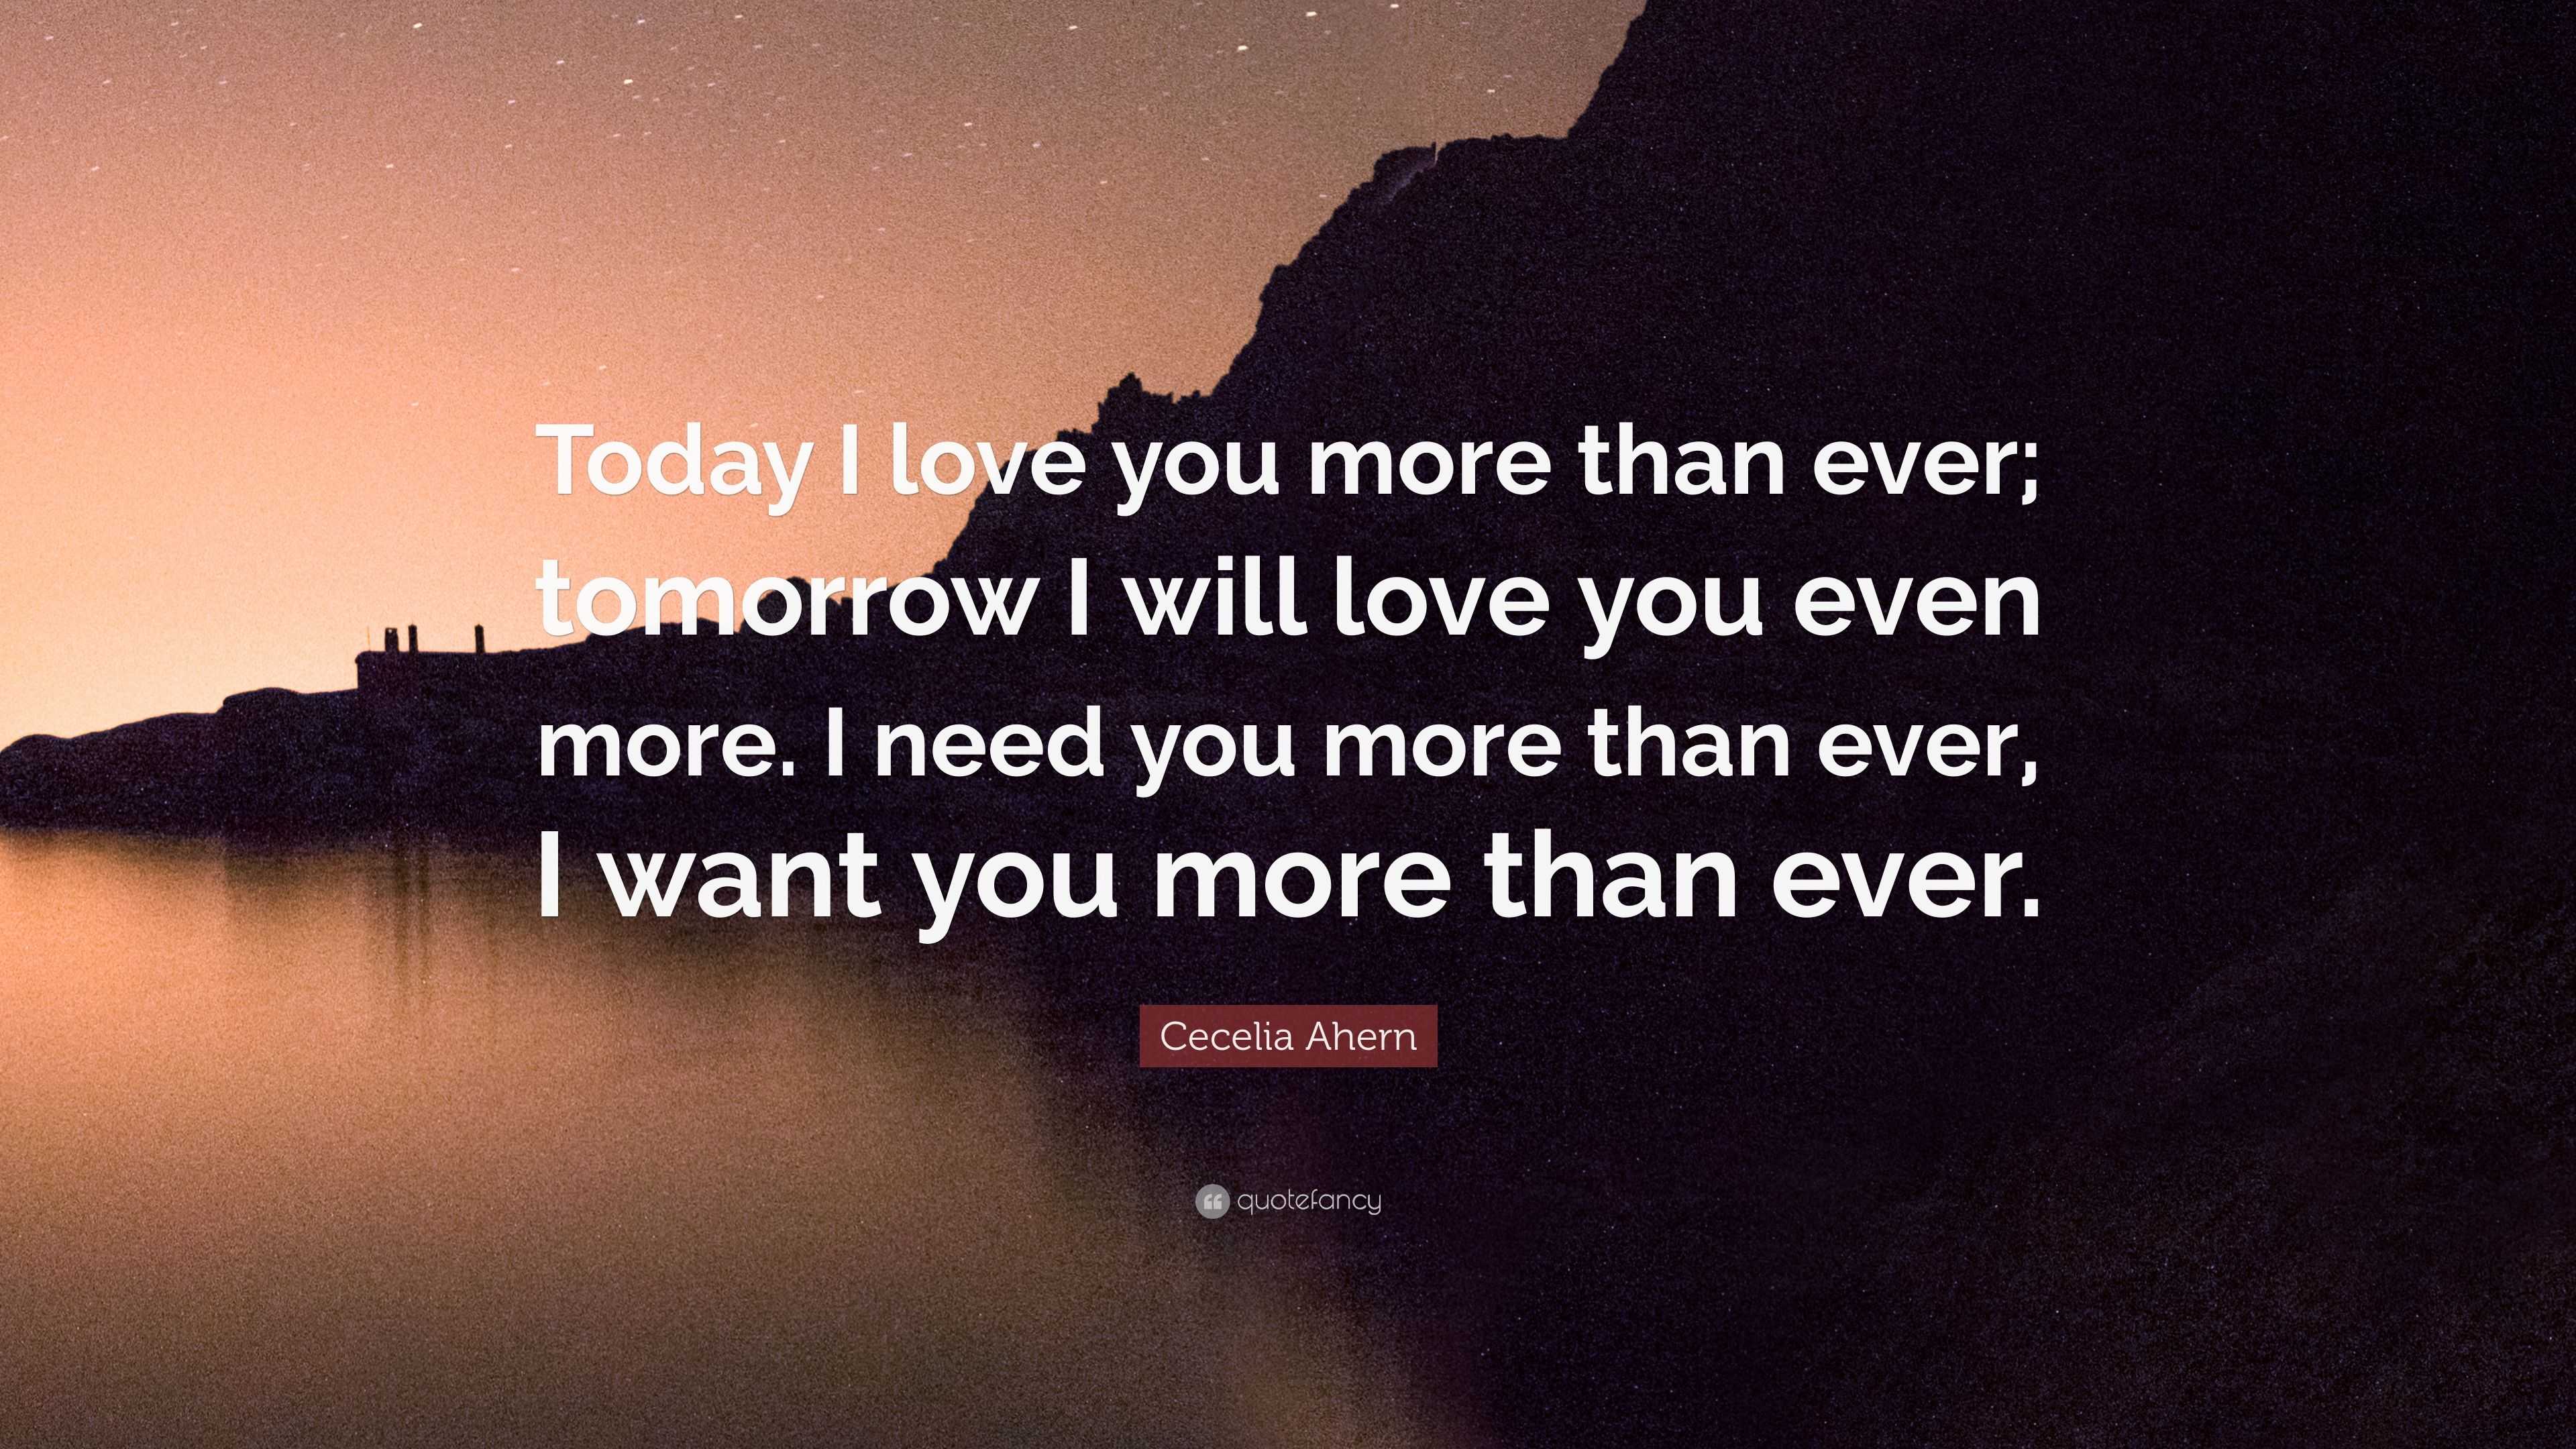 Cecelia Ahern Quote Today I Love You More Than Ever Tomorrow I Will Love You Even More I Need You More Than Ever I Want You More Than Eve 12 Wallpapers Quotefancy